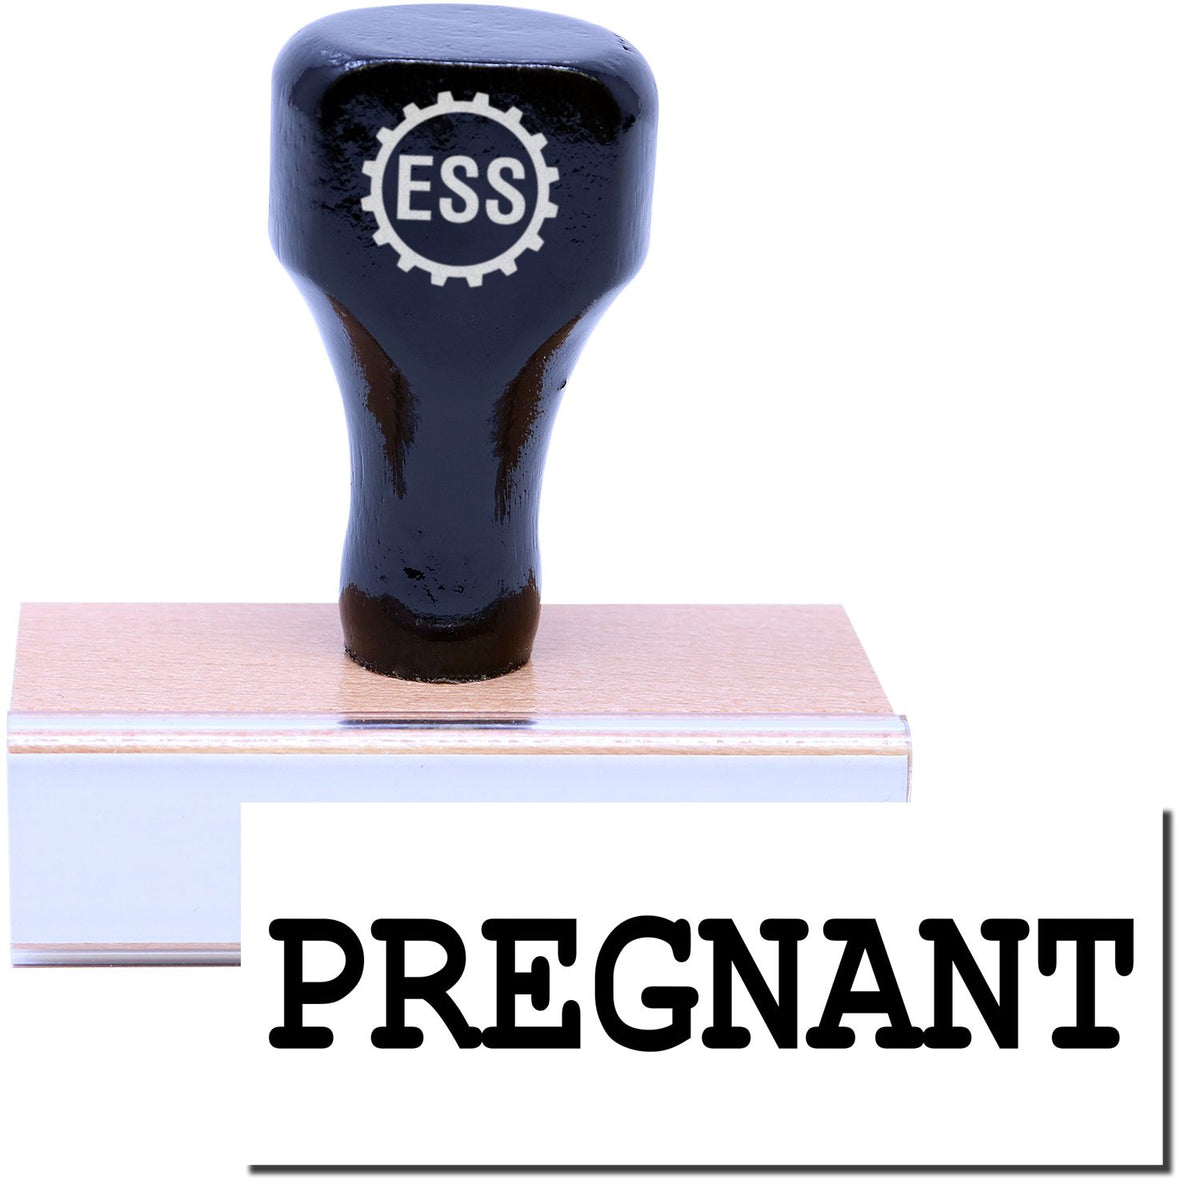 A stock office rubber stamp with a stamped image showing how the text &quot;PREGNANT&quot; is displayed after stamping.